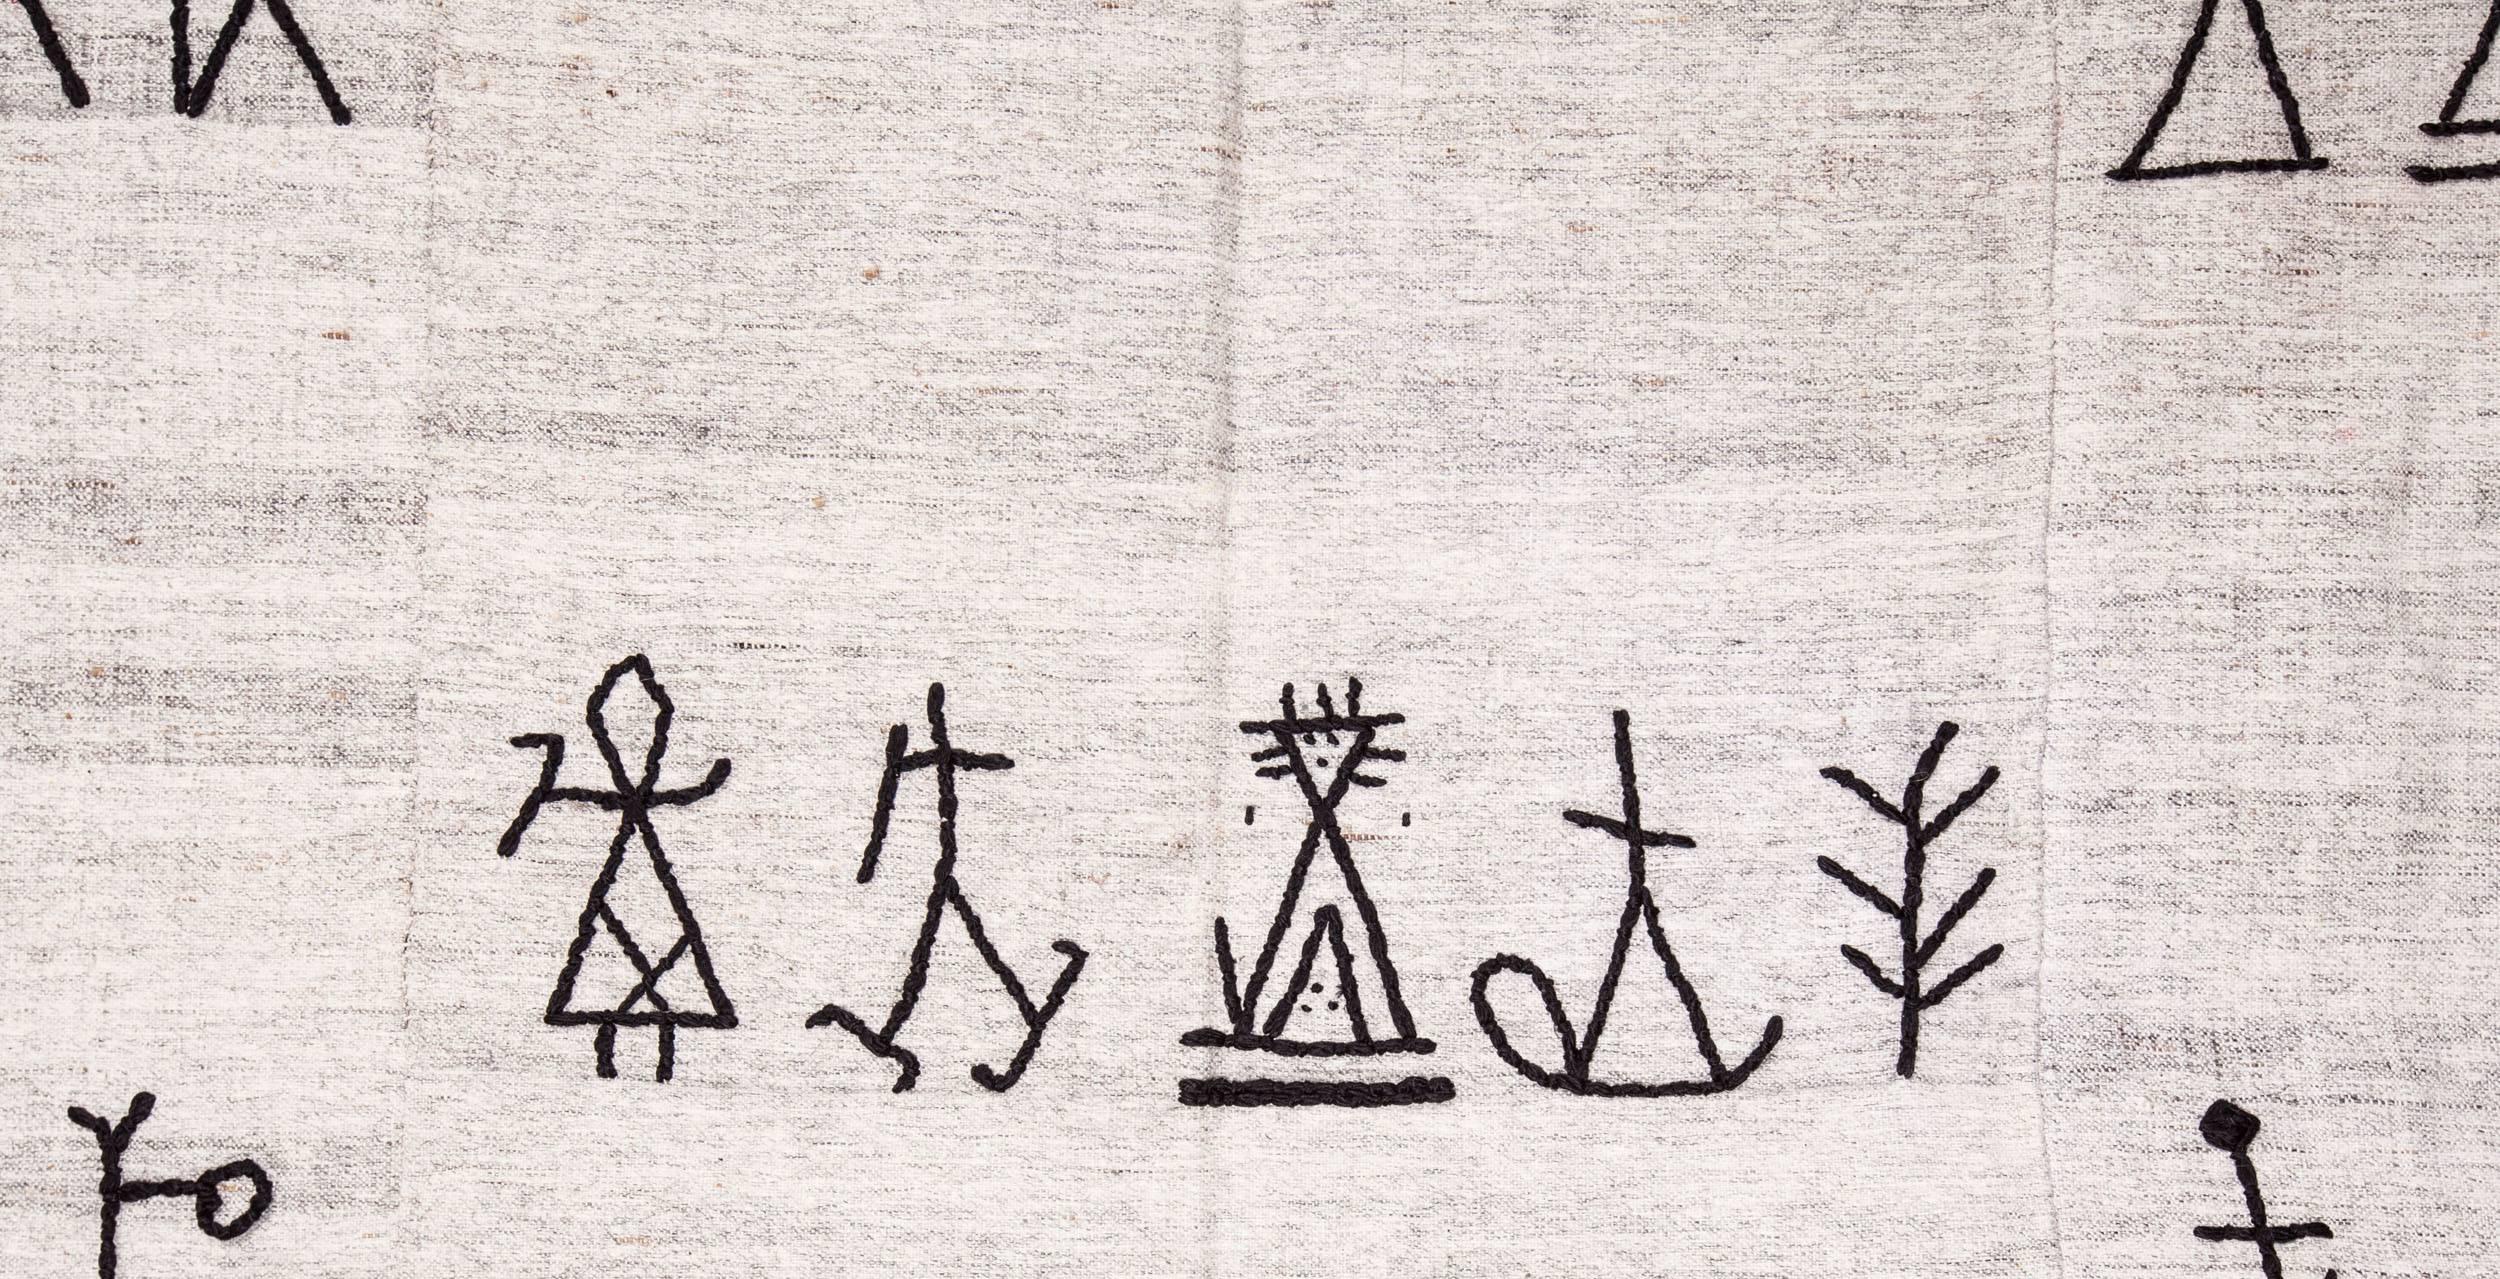 I have always been fascinated by petroglyphs and shaman imagery and I have collected design elements from Shaman drums and rock carvings. I got a group of embroiderers and gave the design pool and got them embroidered in black silk onto Vintage